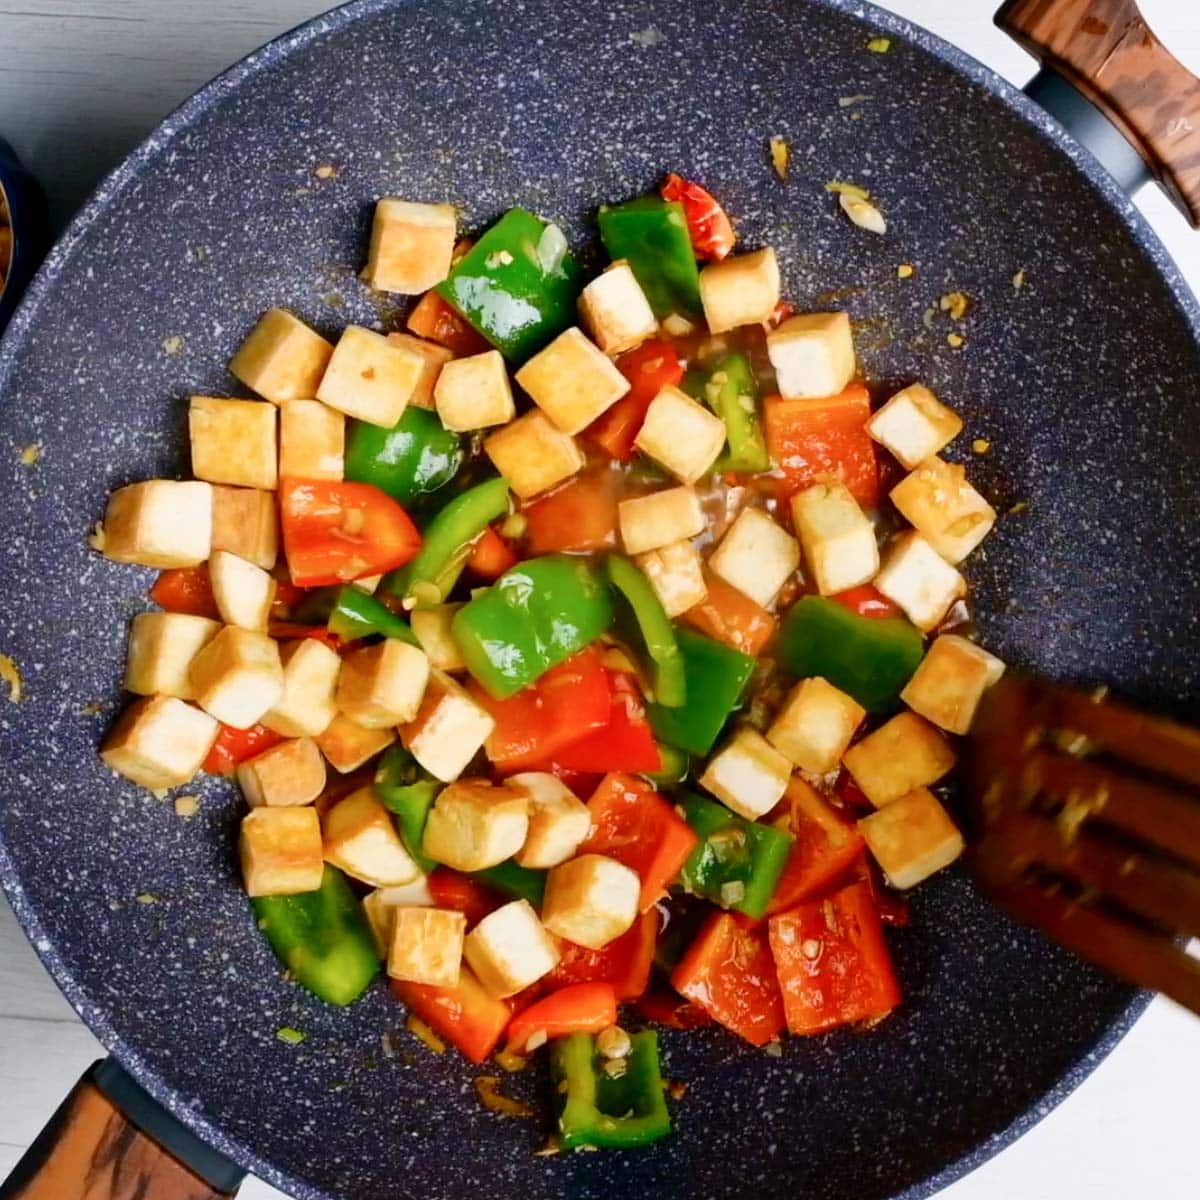 Mix the veggies with tofu in a pan